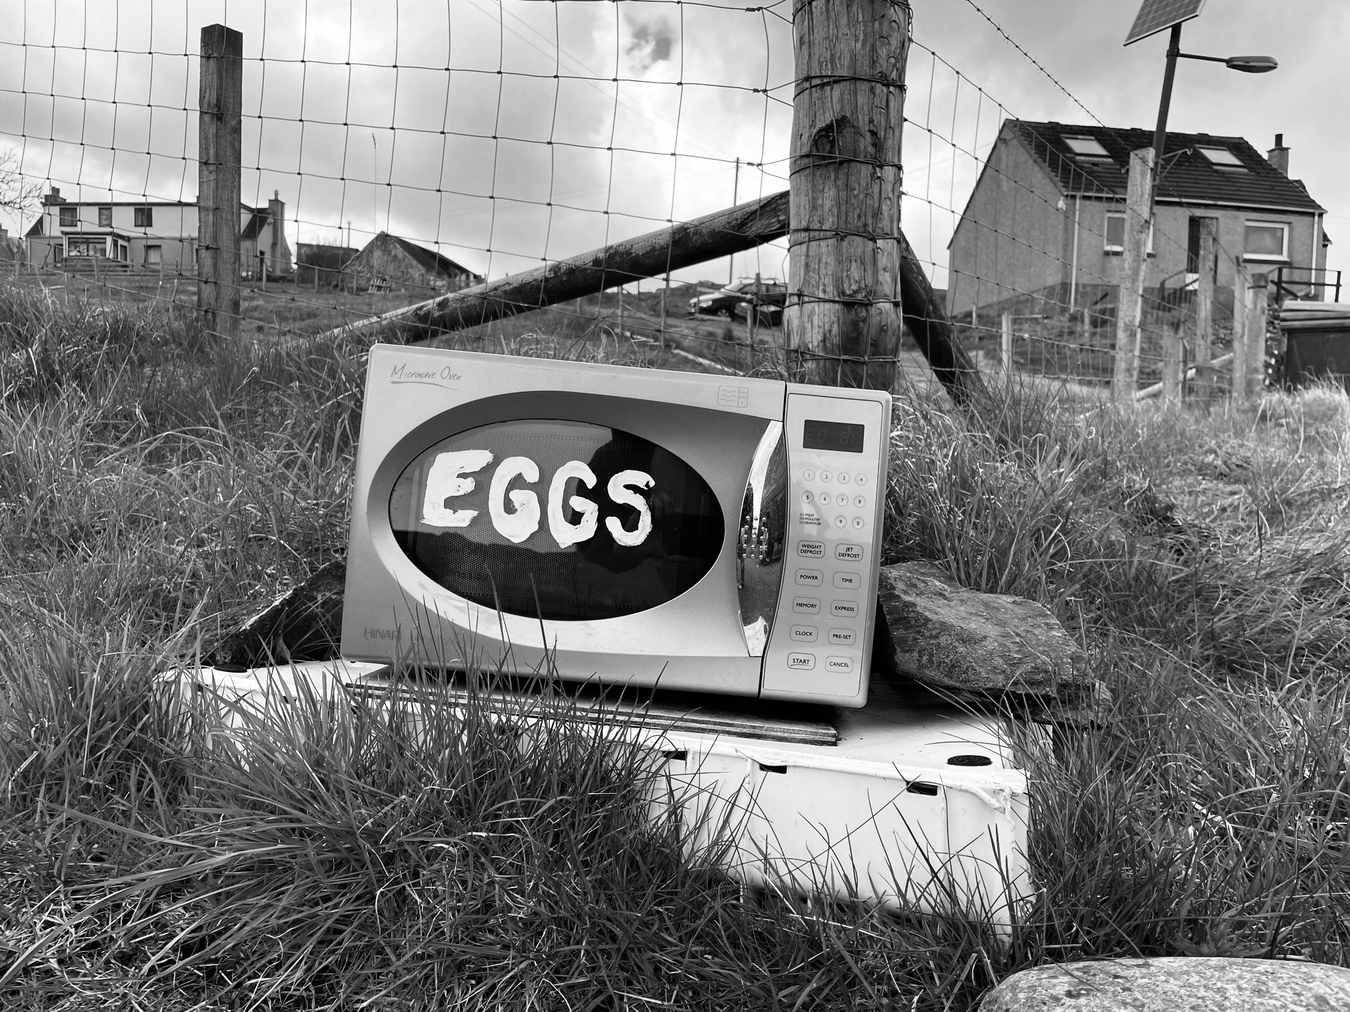 Image: Microwave/mailbox from the Isle of Lewis, Scotland, shared during research correspondence, 2021. Photo: Lucy Skaer.